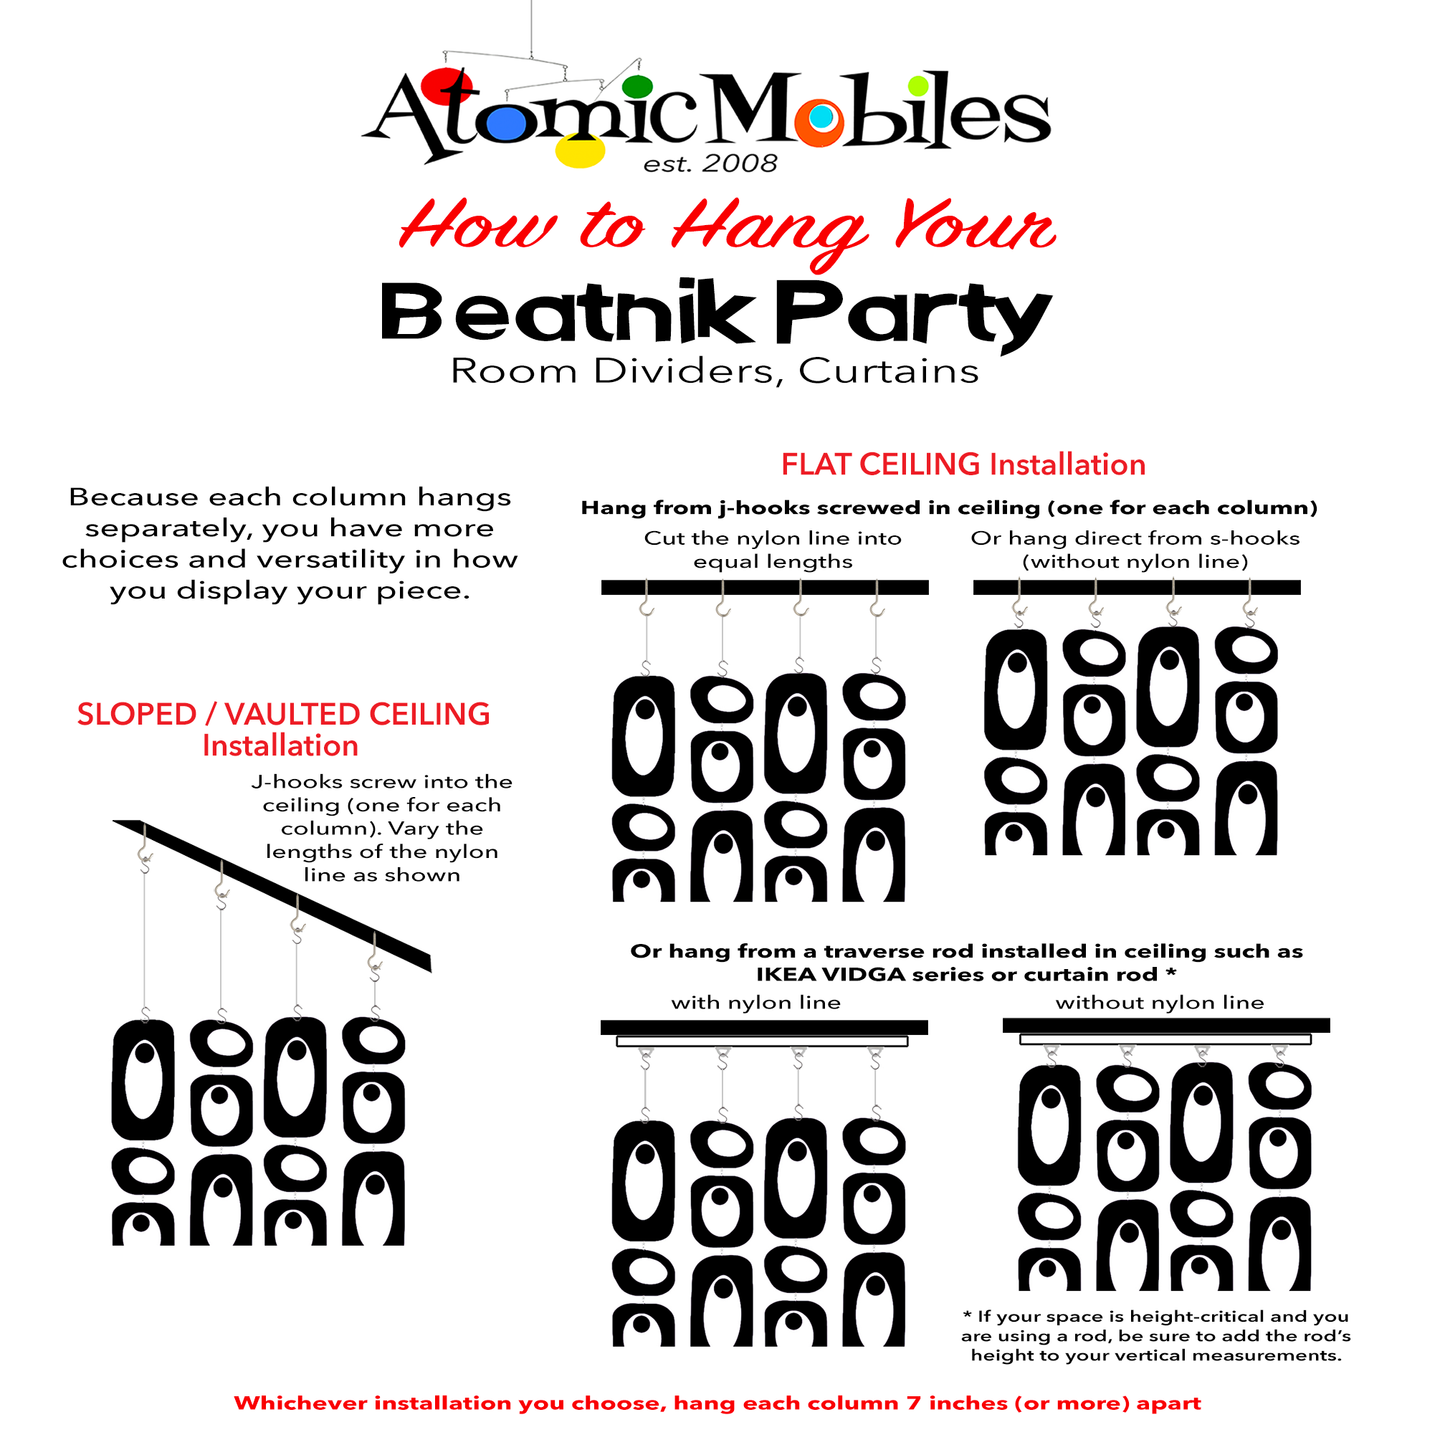 Instructions on How to hang your mid century modern style Beatnik Party Room Divider, Mobile, and Curtain by AtomicMobiles.com